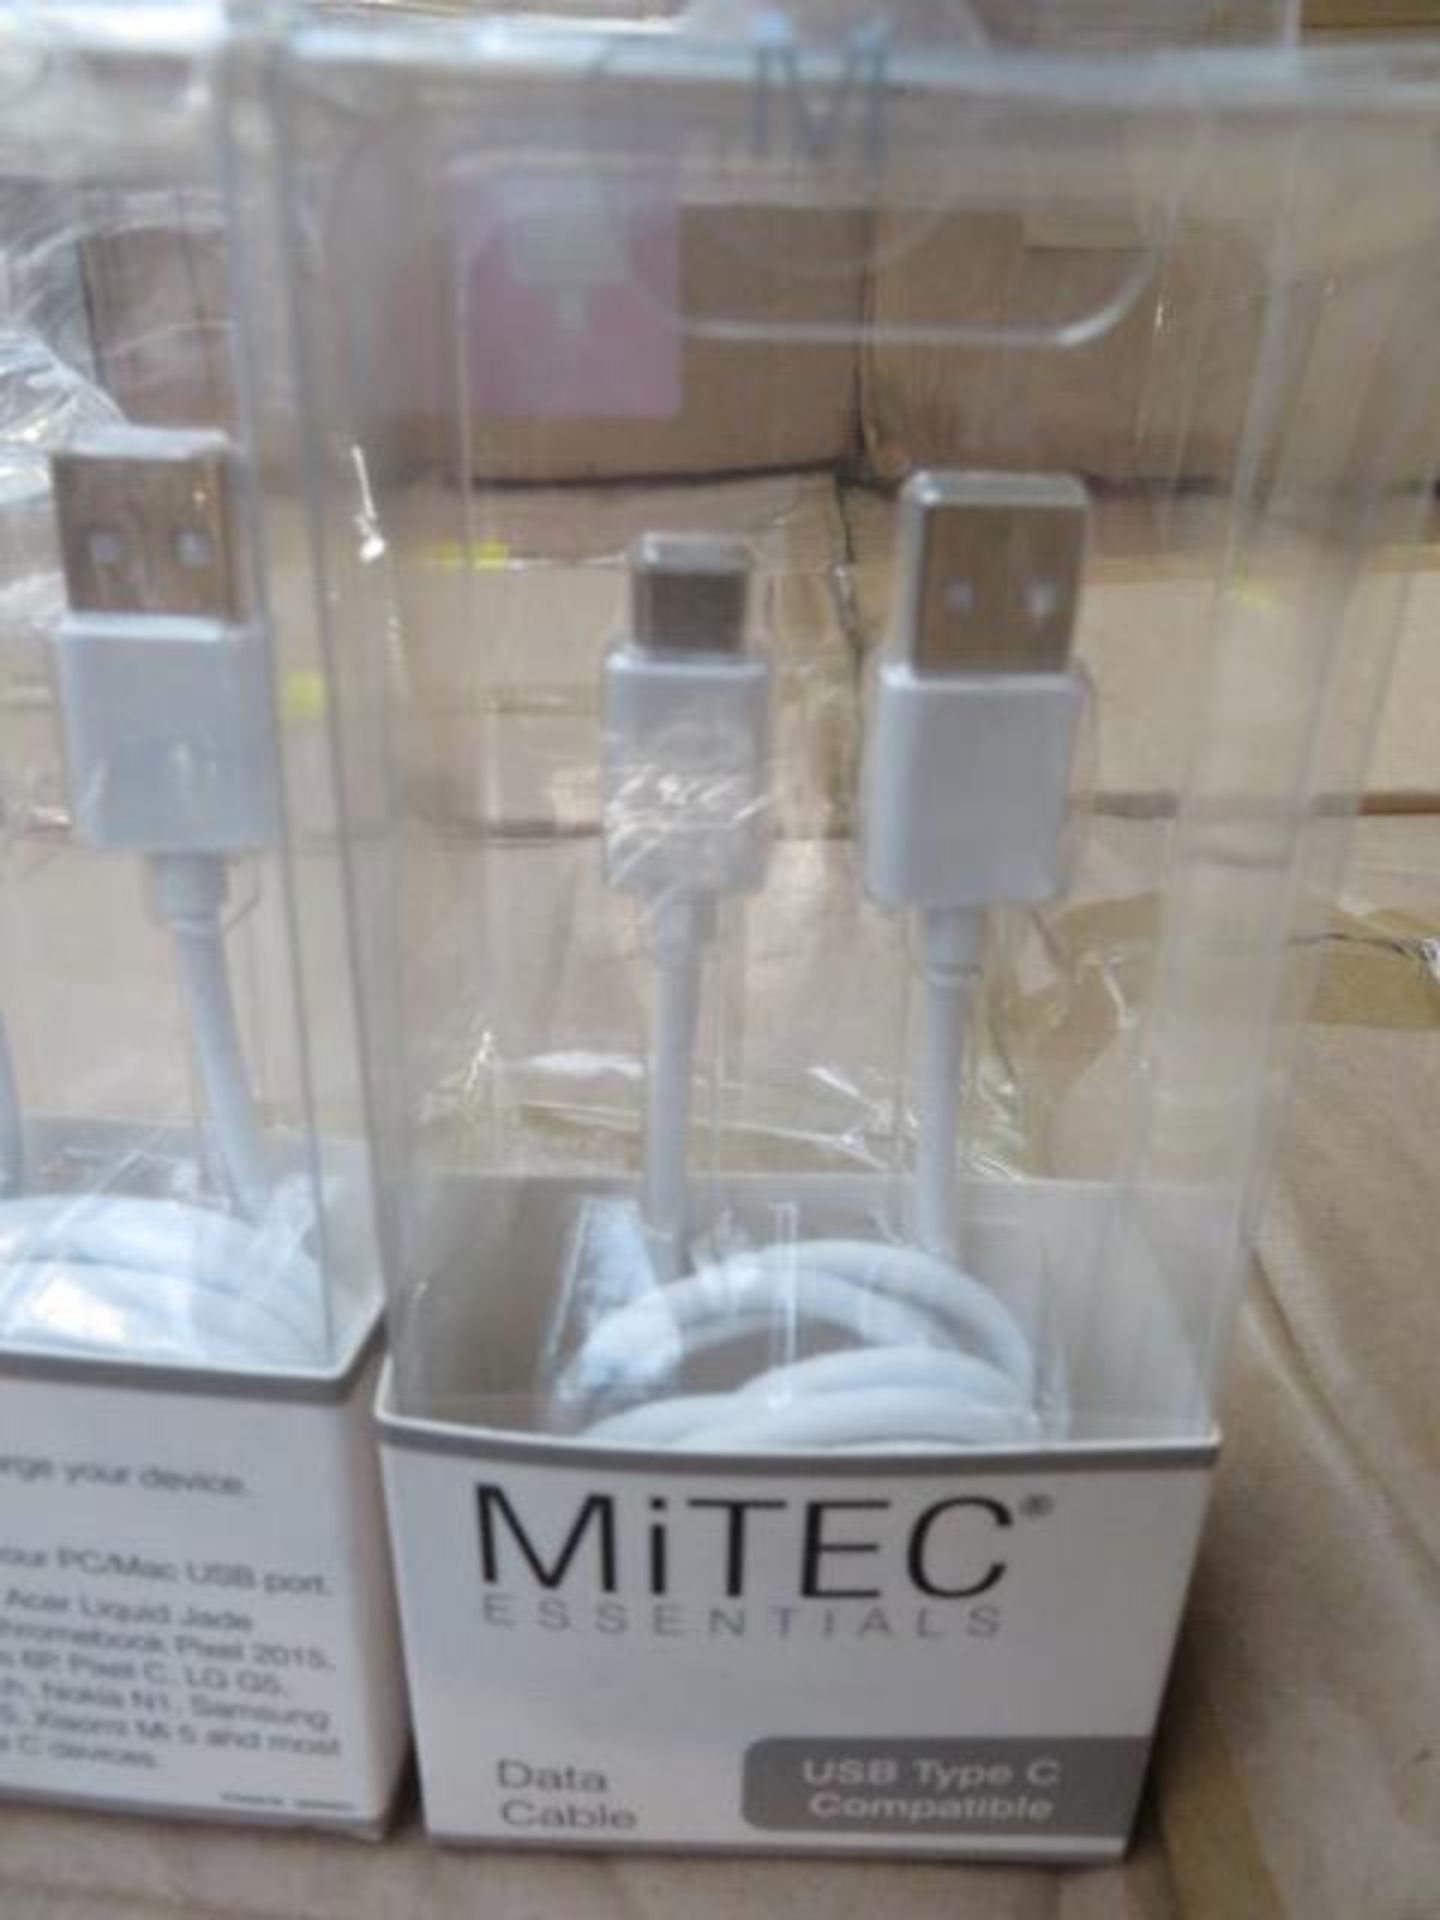 (65) PALLET TO CONTAIN 950 x BRAND NEW MiTEC ESSENTIALS DATA CABLE. USB TYPE C COMPATIBLE. RRP ... - Image 2 of 2